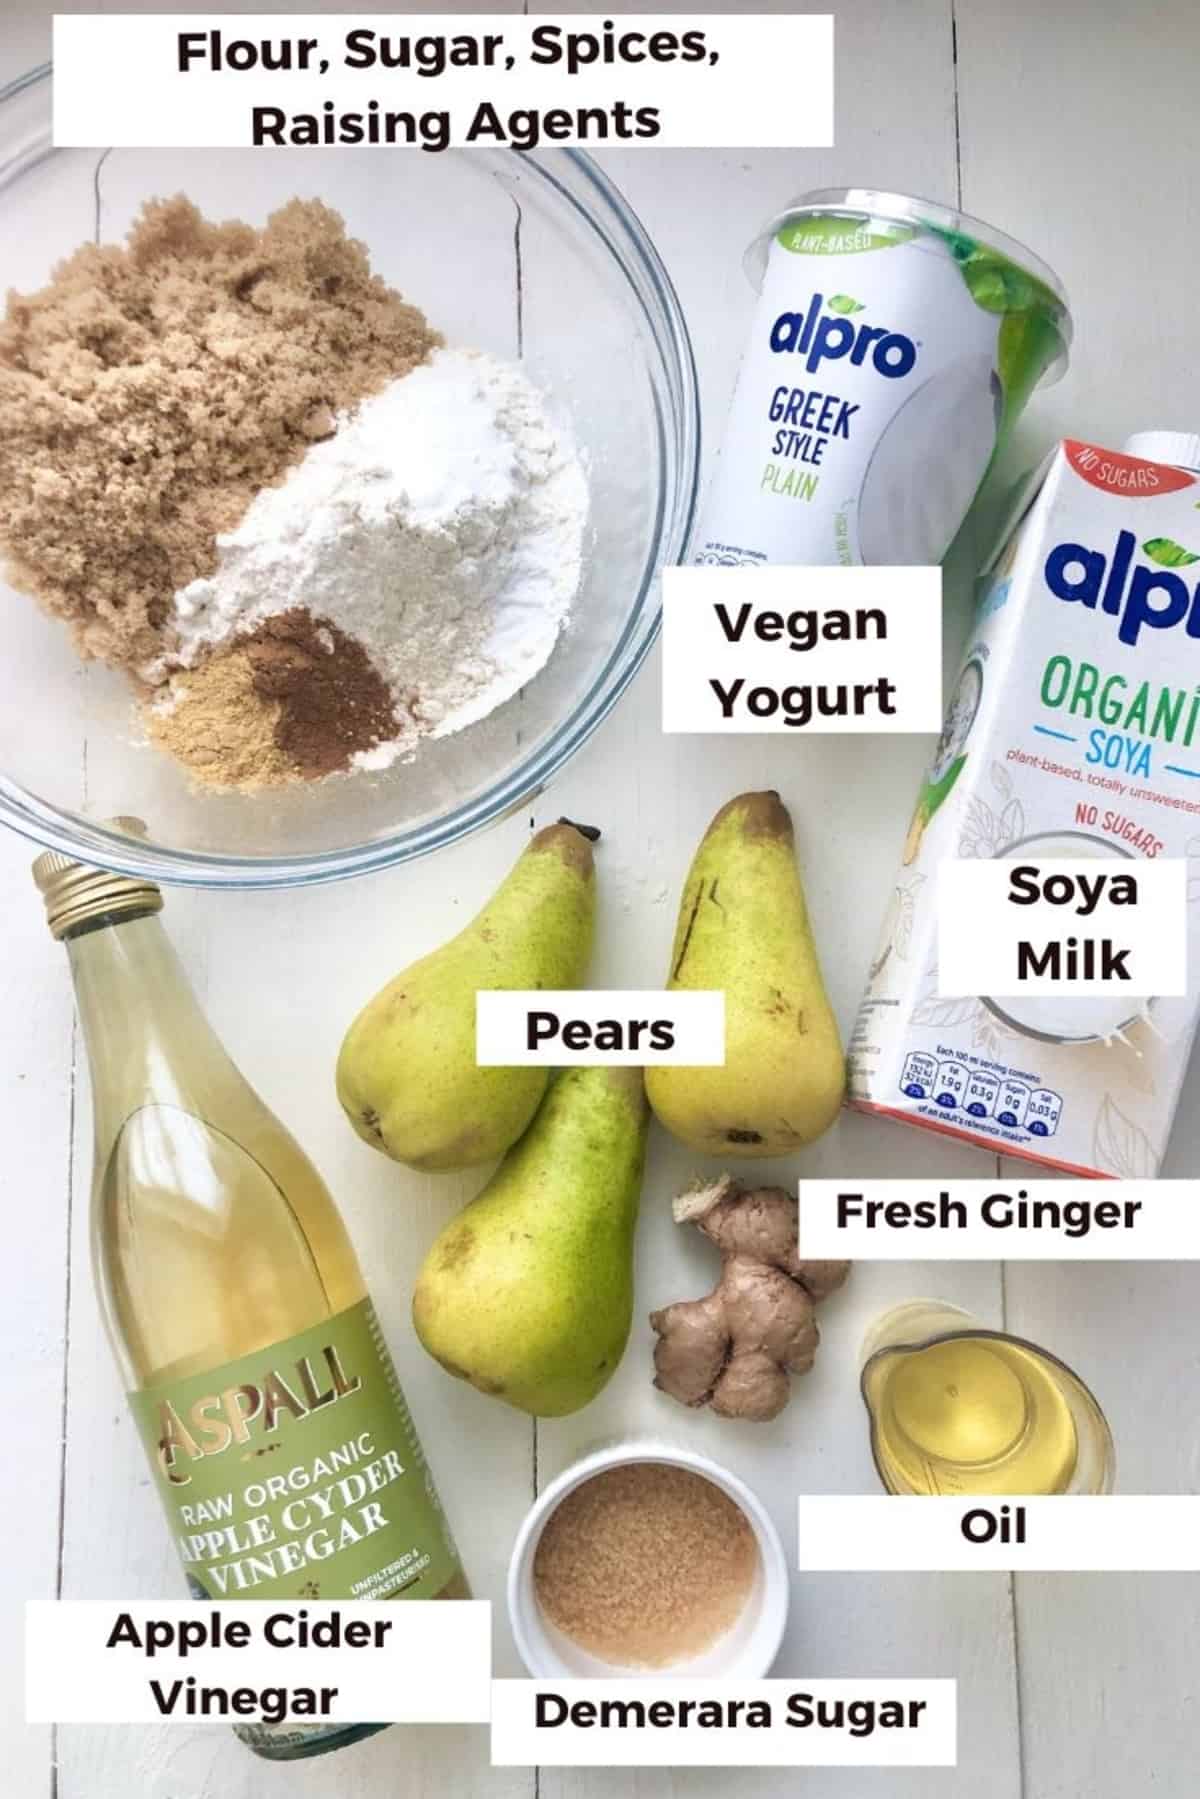 Ingredients for making the cake.